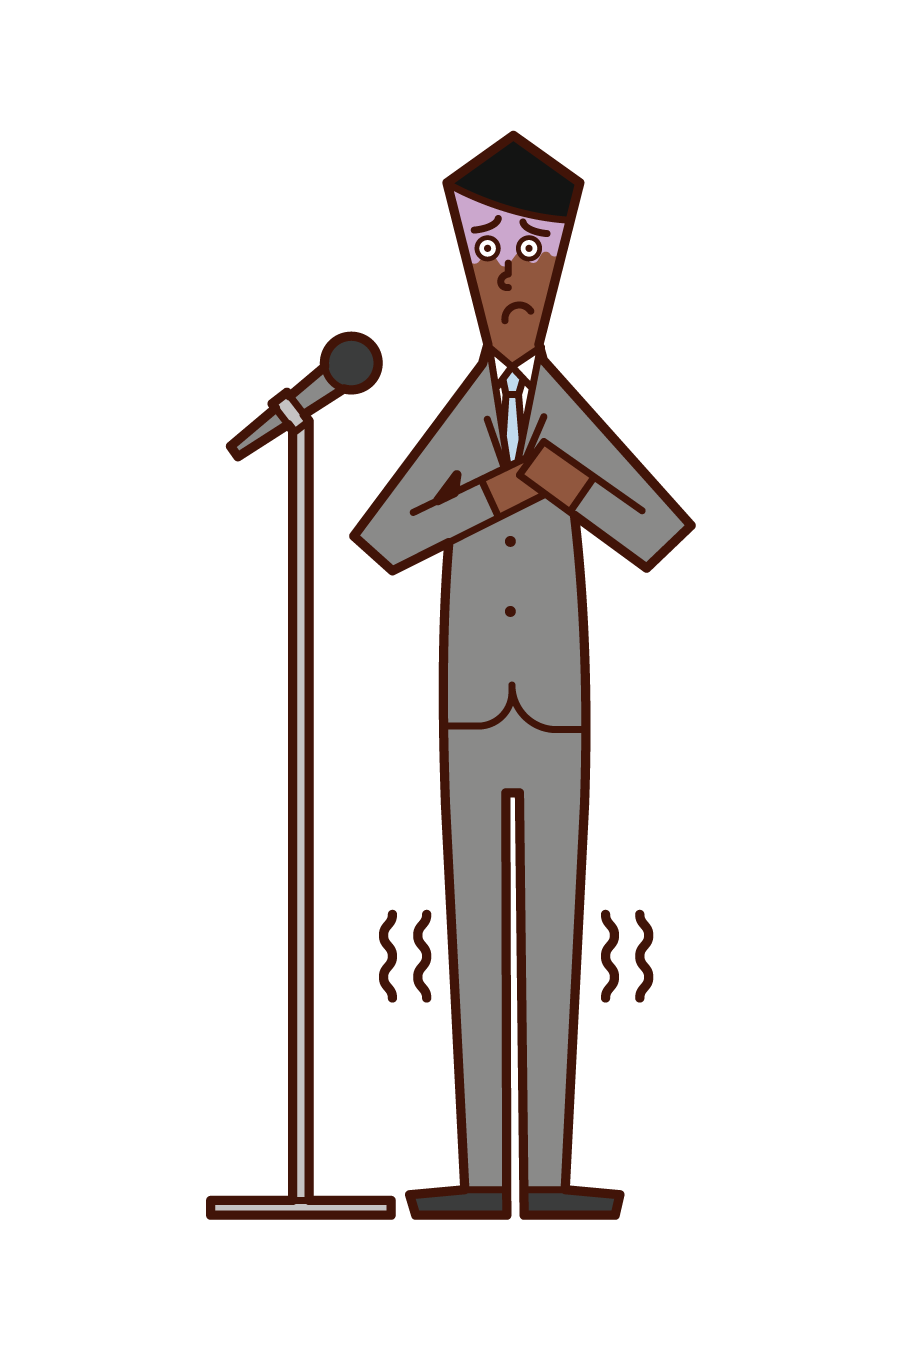 Illustration of a person (man) nervous in a speech